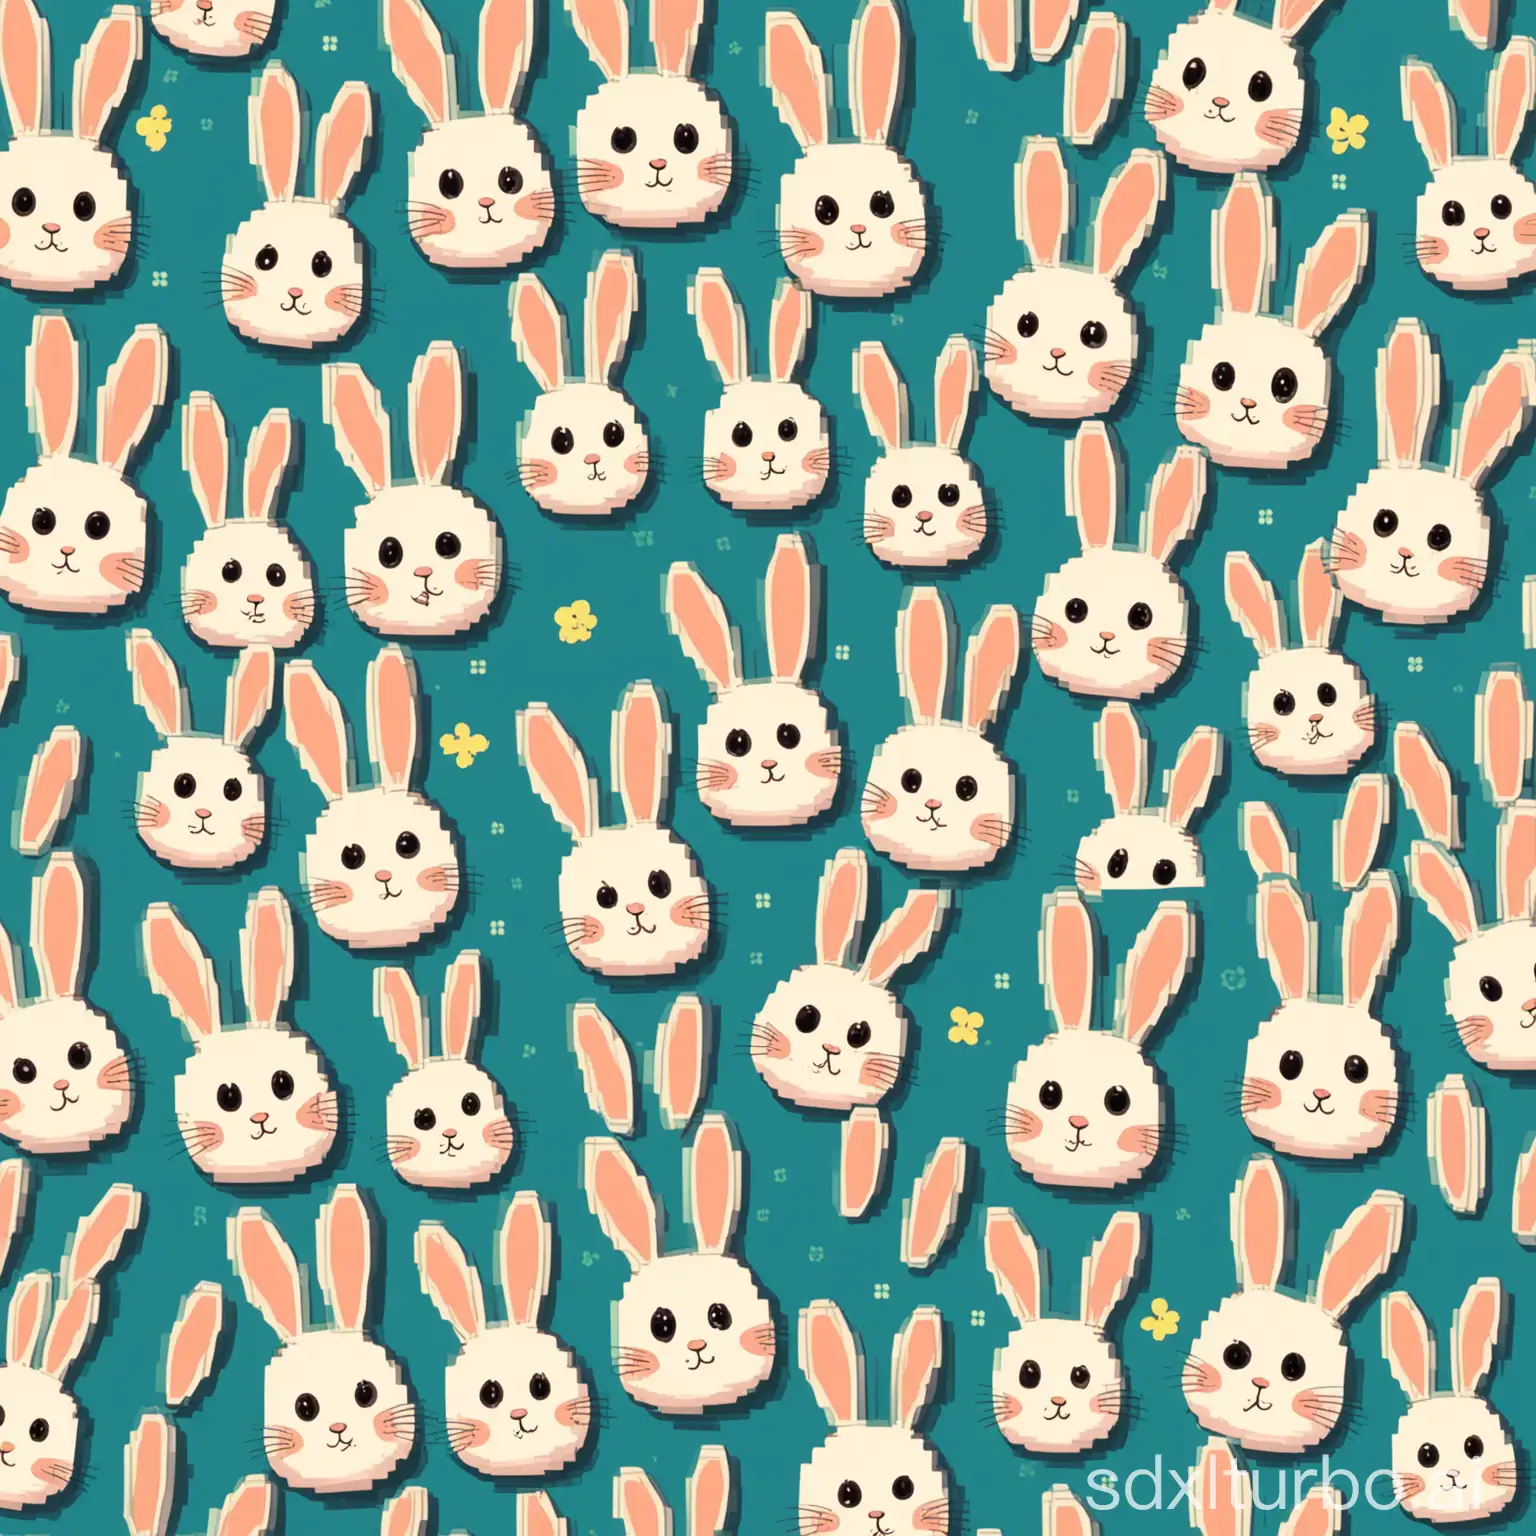 Cute-Cartoon-Rabbit-Pattern-Playful-Background-for-Whimsical-Designs